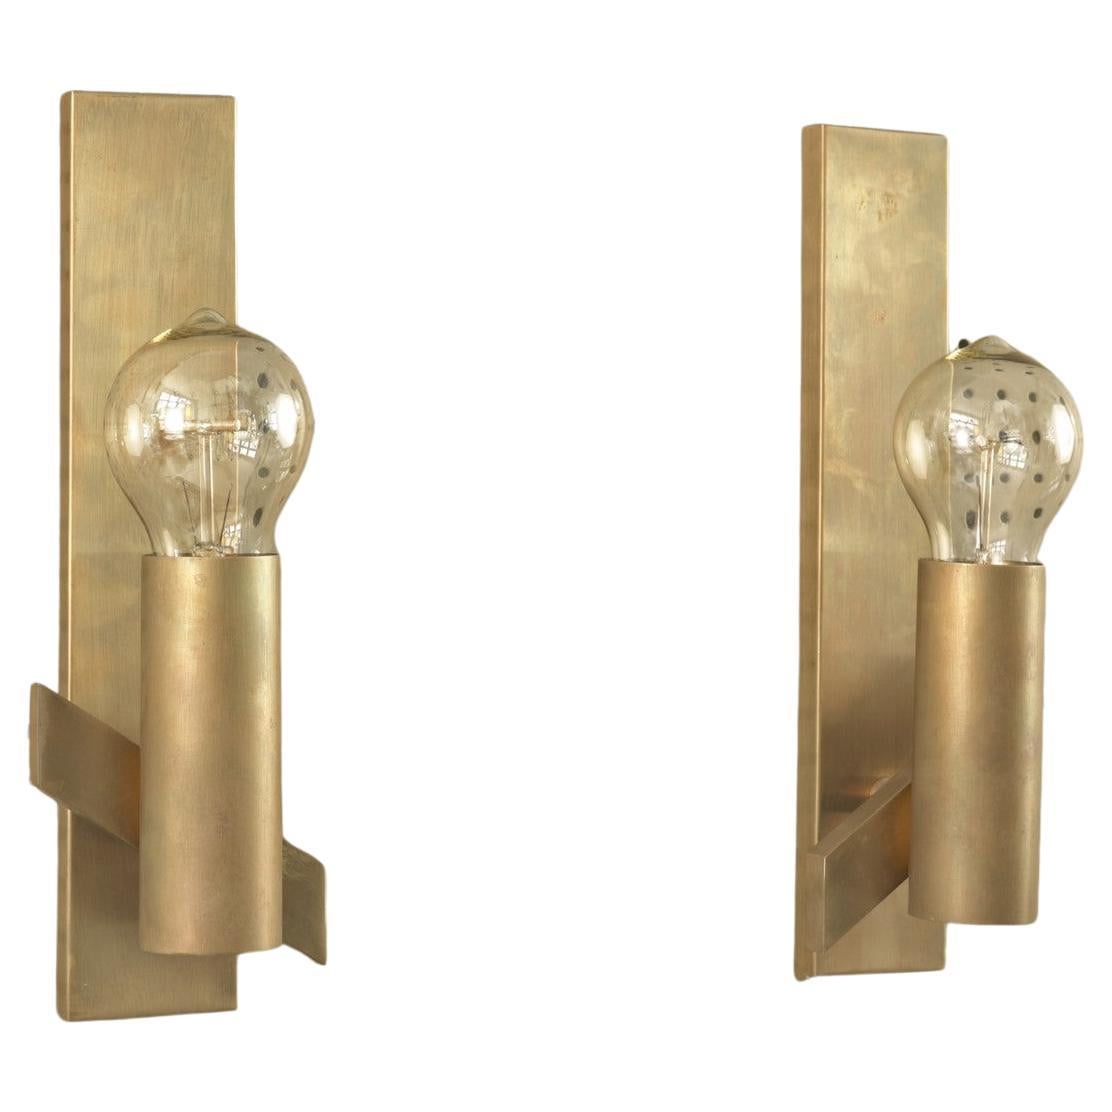 Pair of Brass Wall Lights, Germany - 1960